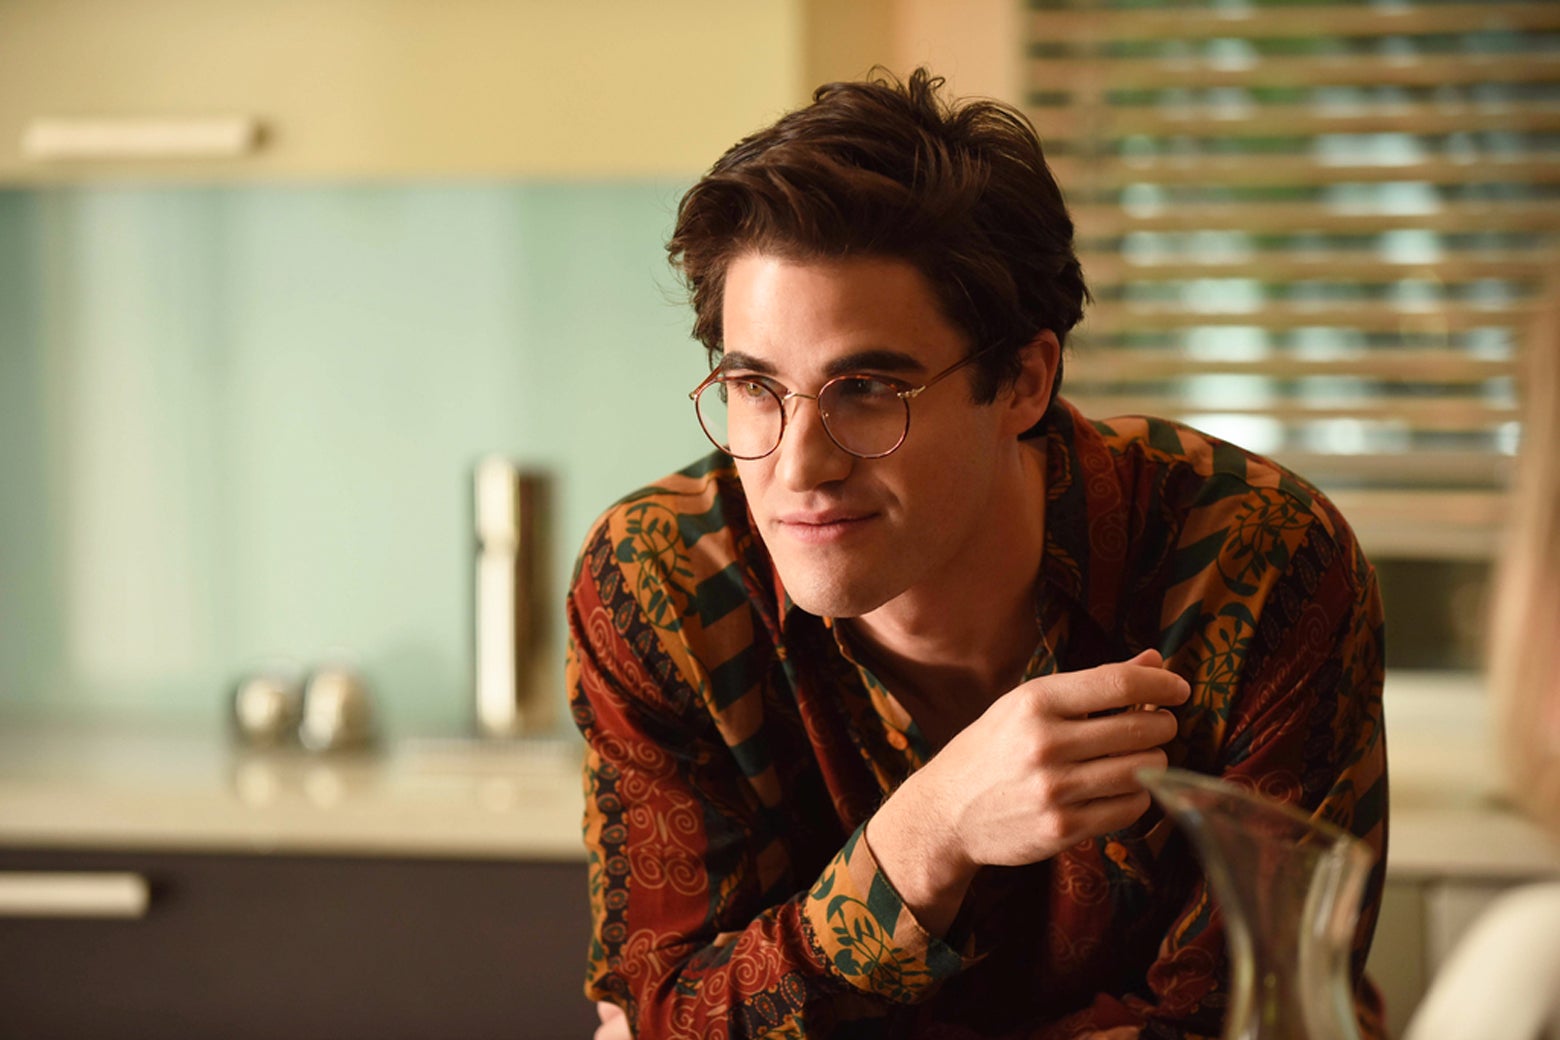 Darren Criss as Andrew Cunanan in The Assassination of Gianni Versace: American Crime Story. Jeff Daly/FX